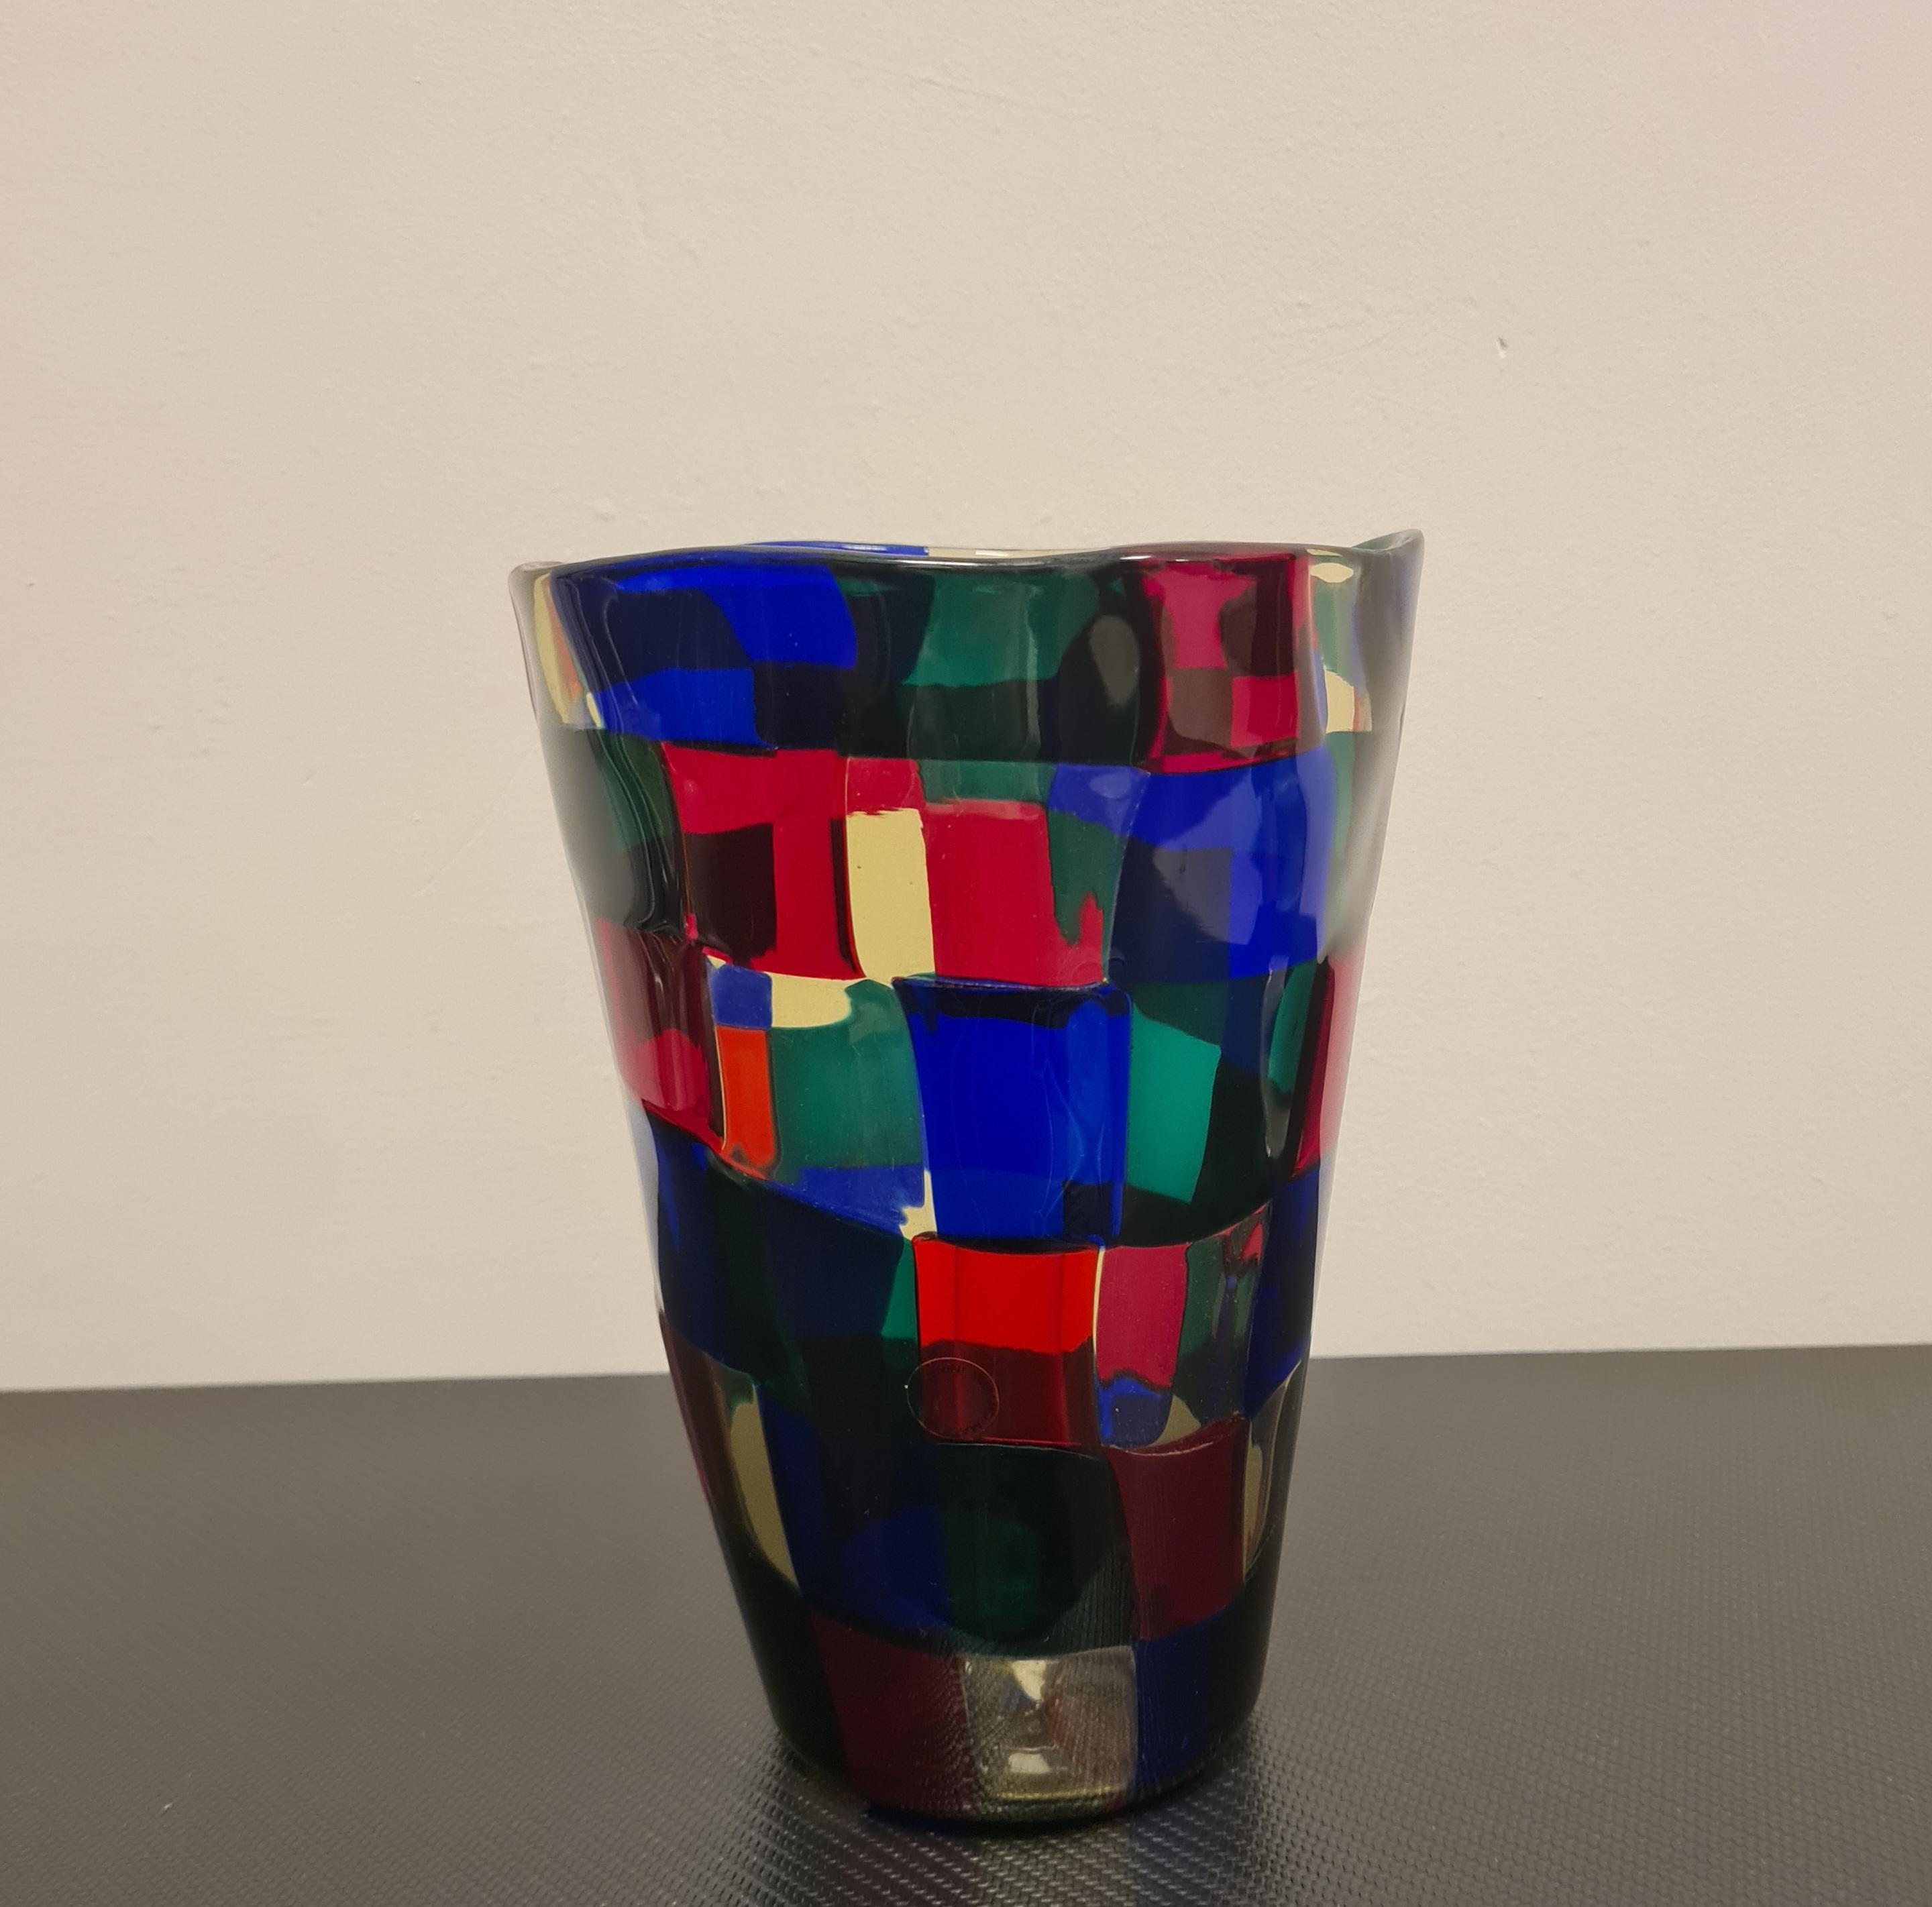 Vase from the Pezzati series designed by Fulvio Bianconi for Venini.

In Murano glass made with transparent glass tesserae in the colors pagliesco, red, sapphire and green.

Pezzati was presented at the XXV Venice Biennale in 1950 where it was a